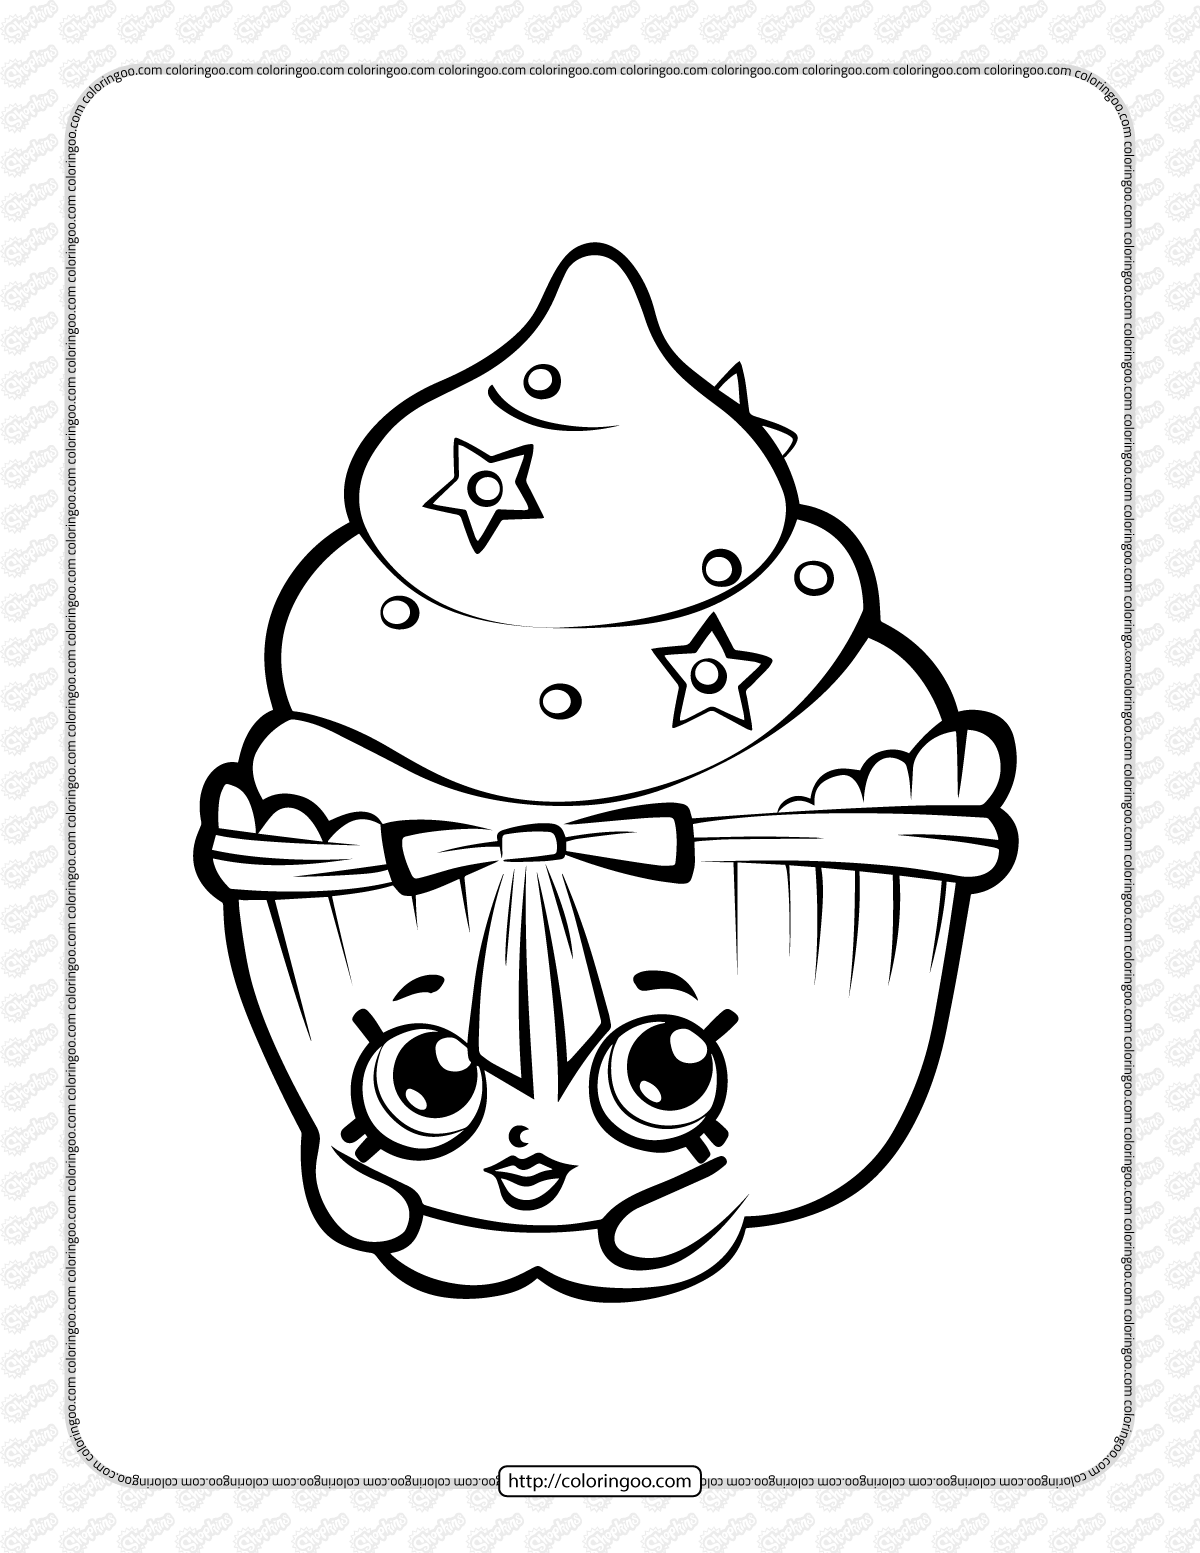 printable charming shopkins coloring pages